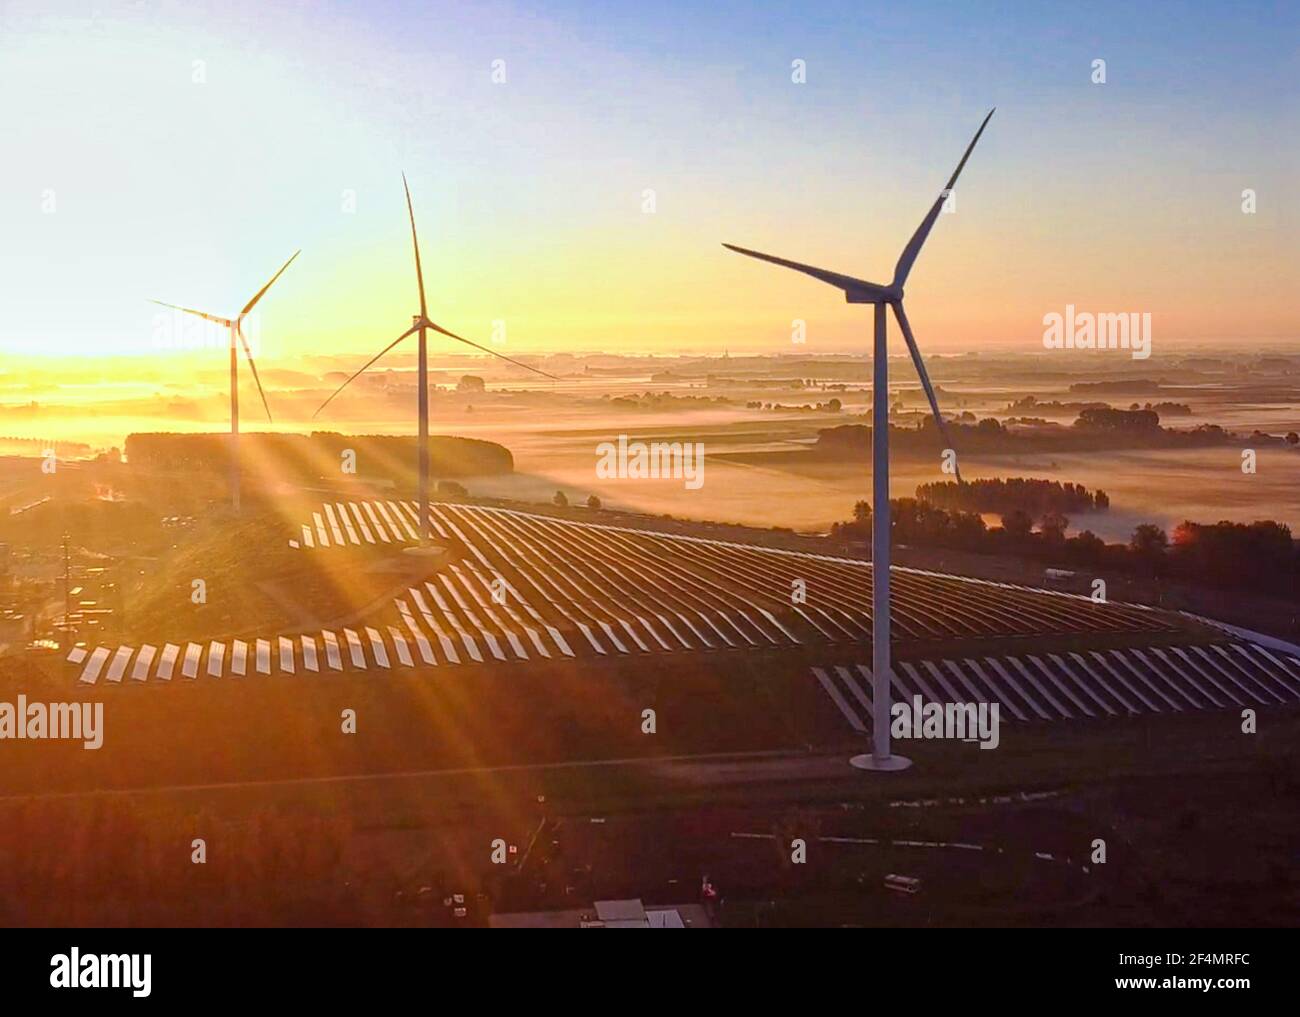 This drone Image was taken above Gelderland looking at 3 power generators at early morning. Stock Photo